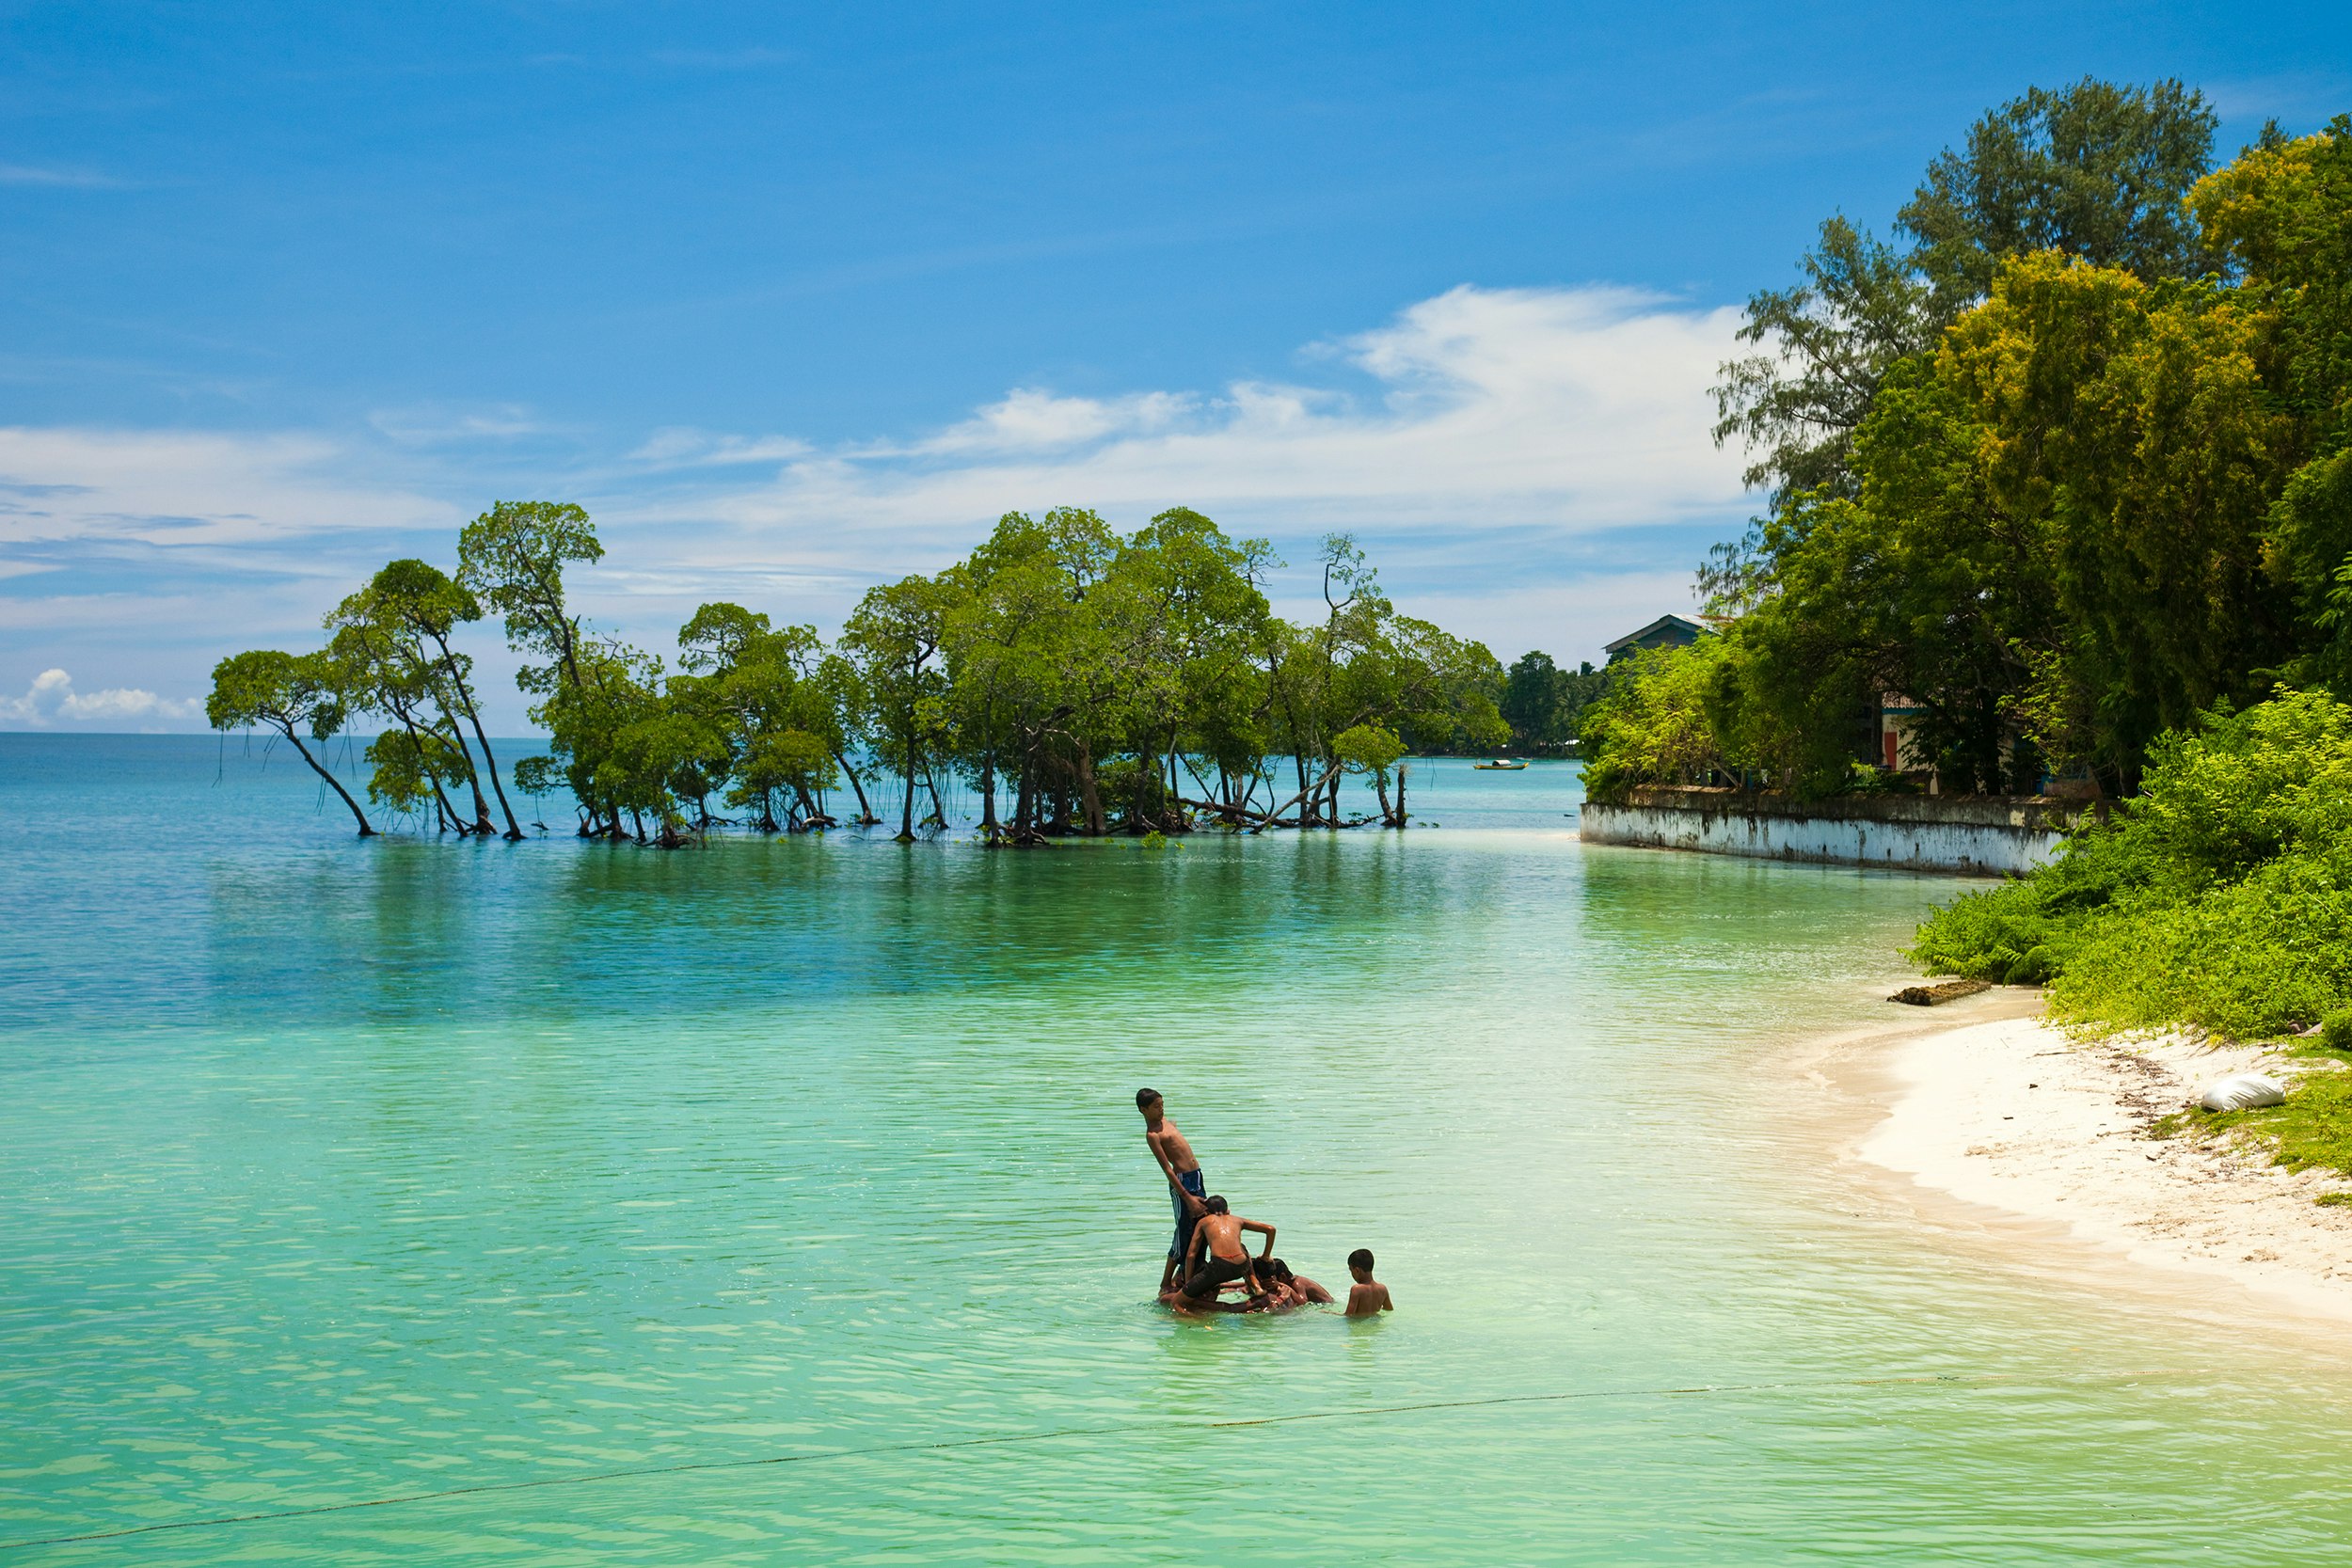 A group of Indian children playing in the shallow turquoise waters near the Havelock Island jetty.